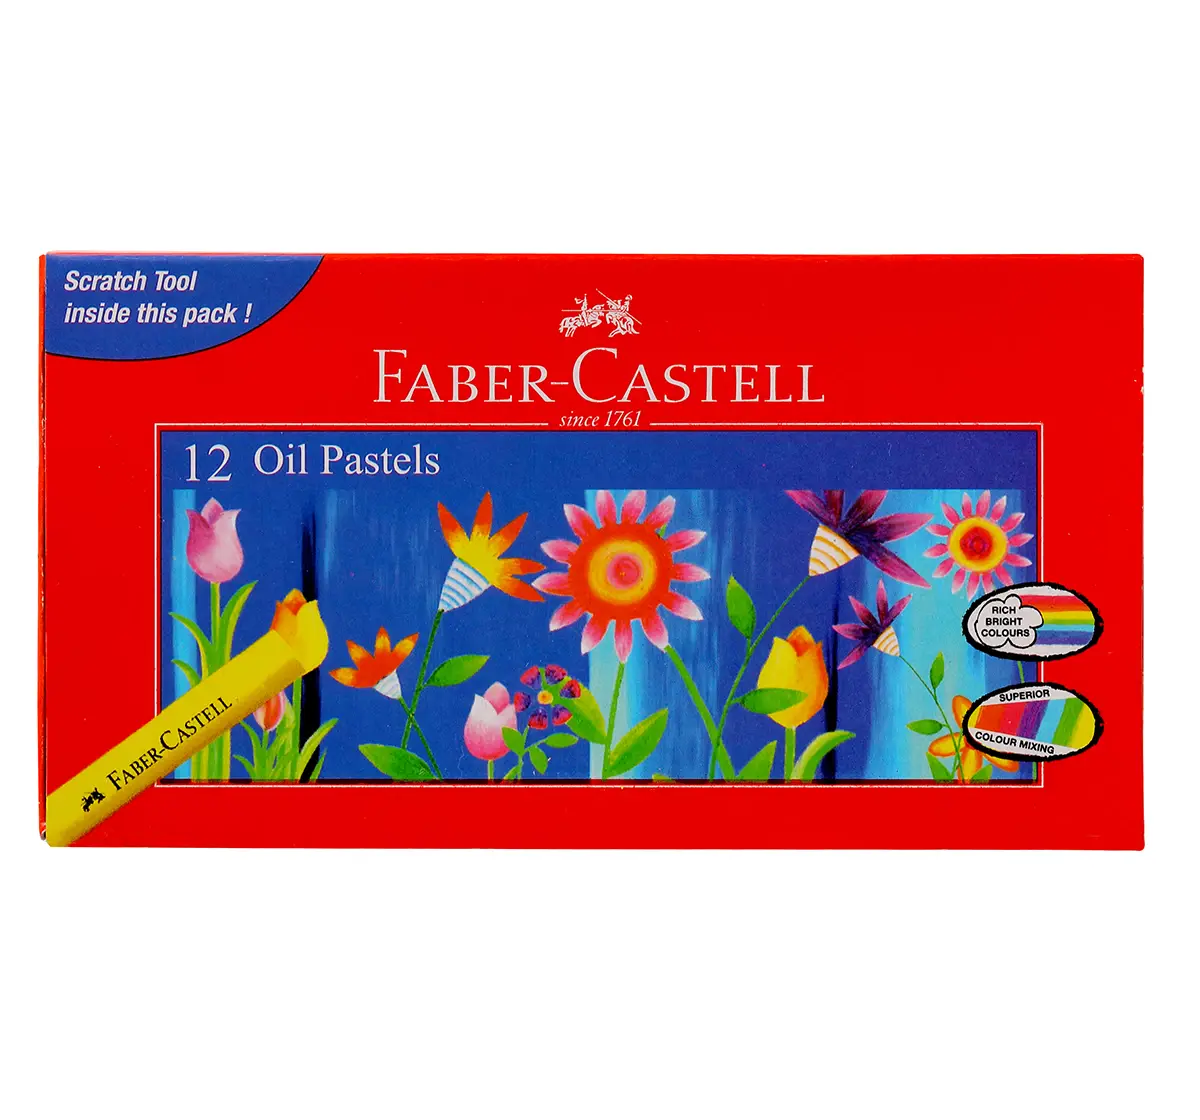 Faber-Castell 123010 oil pastels round pack of 12, 4Y+